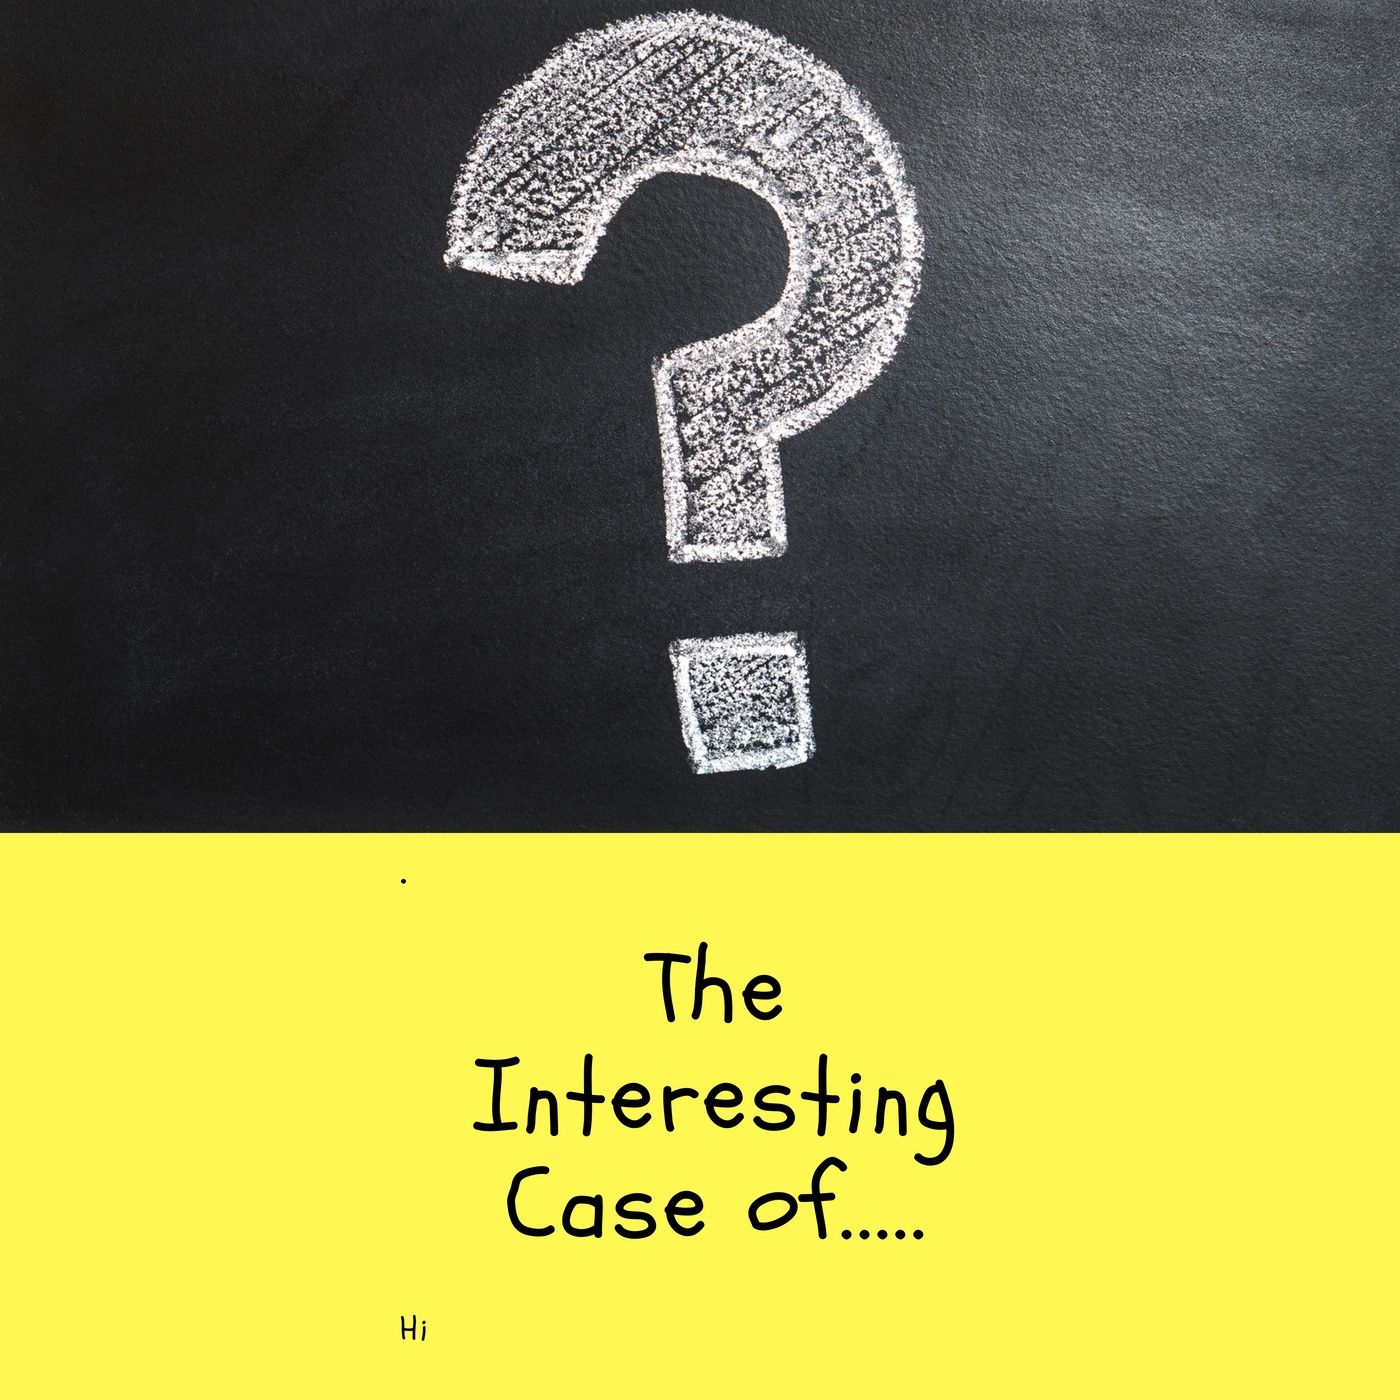 The Interesting Case of.....